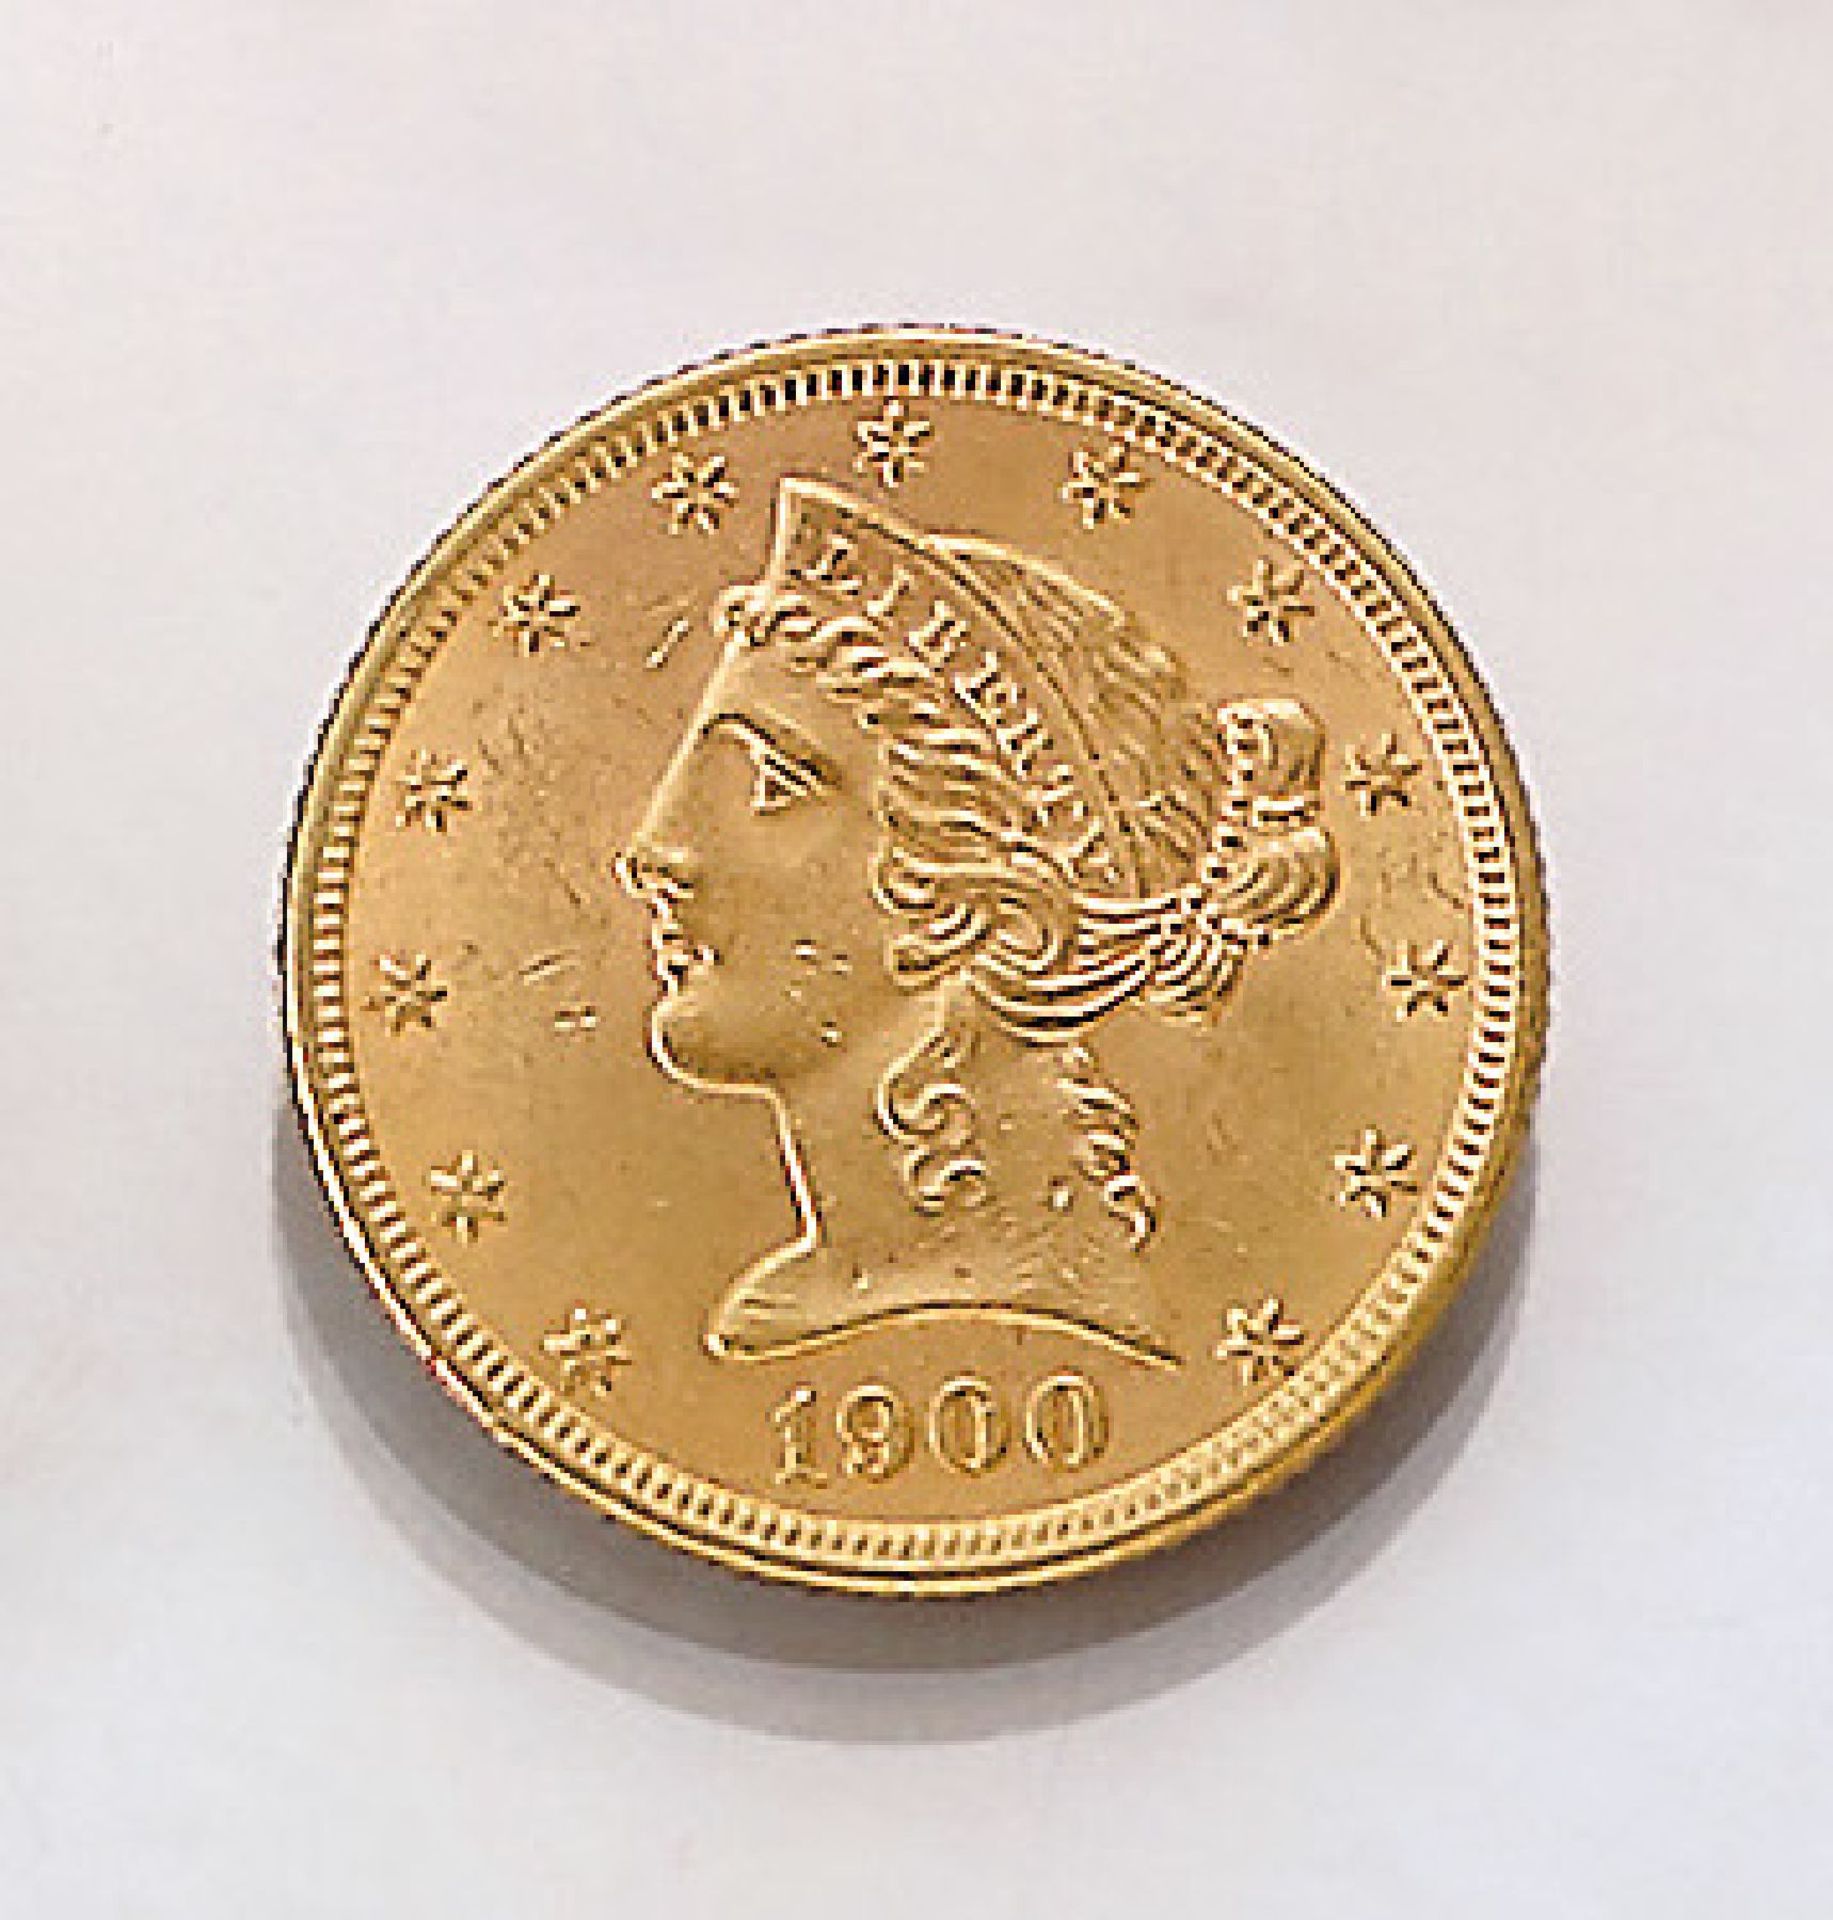 Gold coin, 5 Dollars, USA, 1900 , Liberty head, RV: bald eagle with arrows and laurel wreath, In god